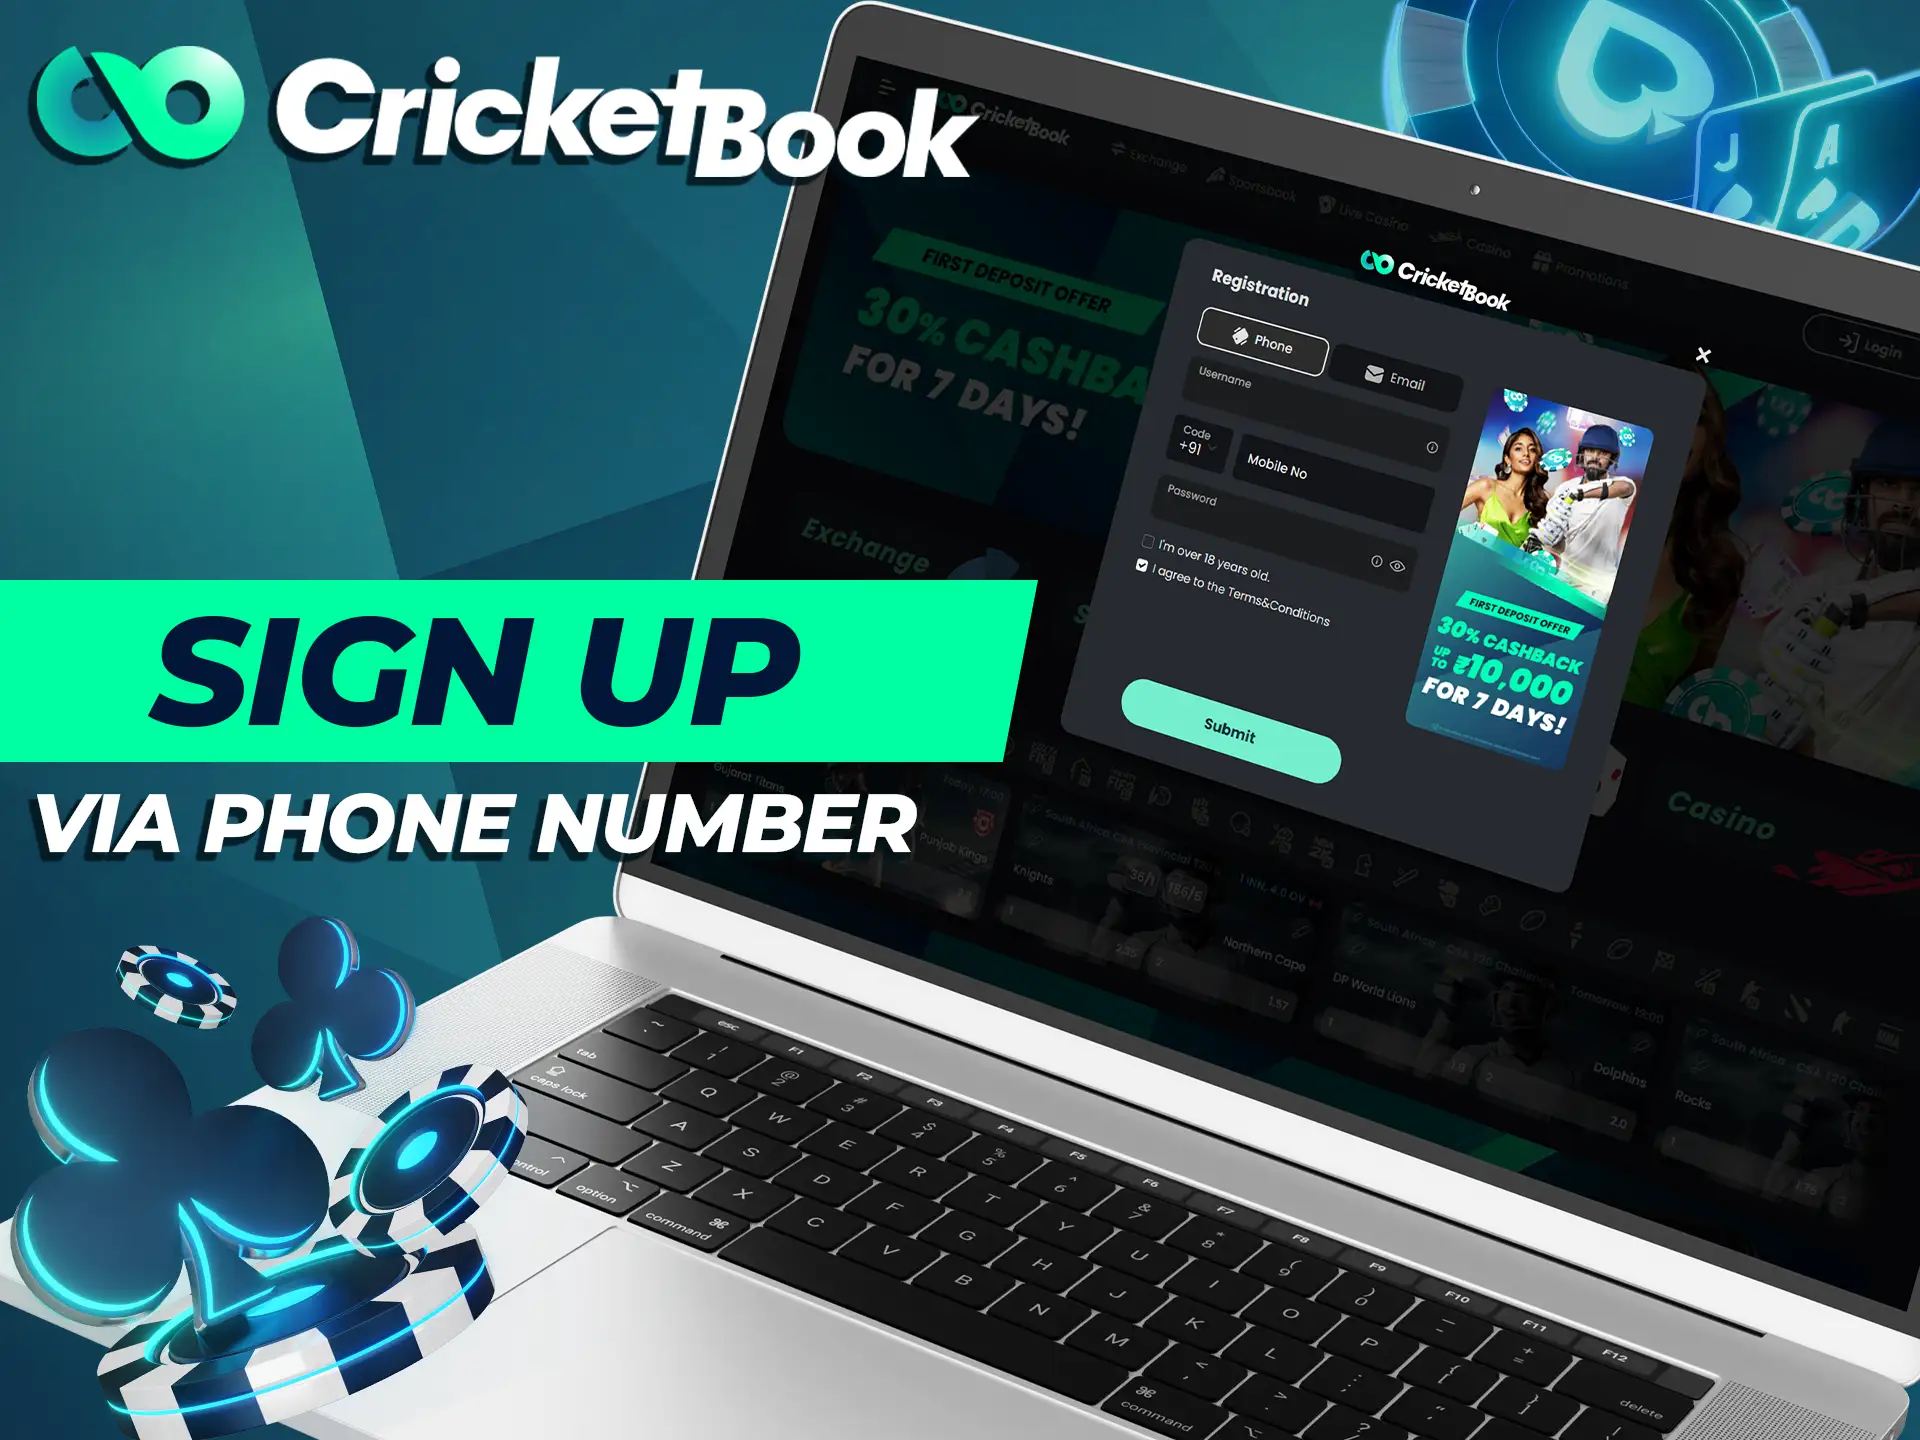 The registration process for CricketBook is possible through your phone number.